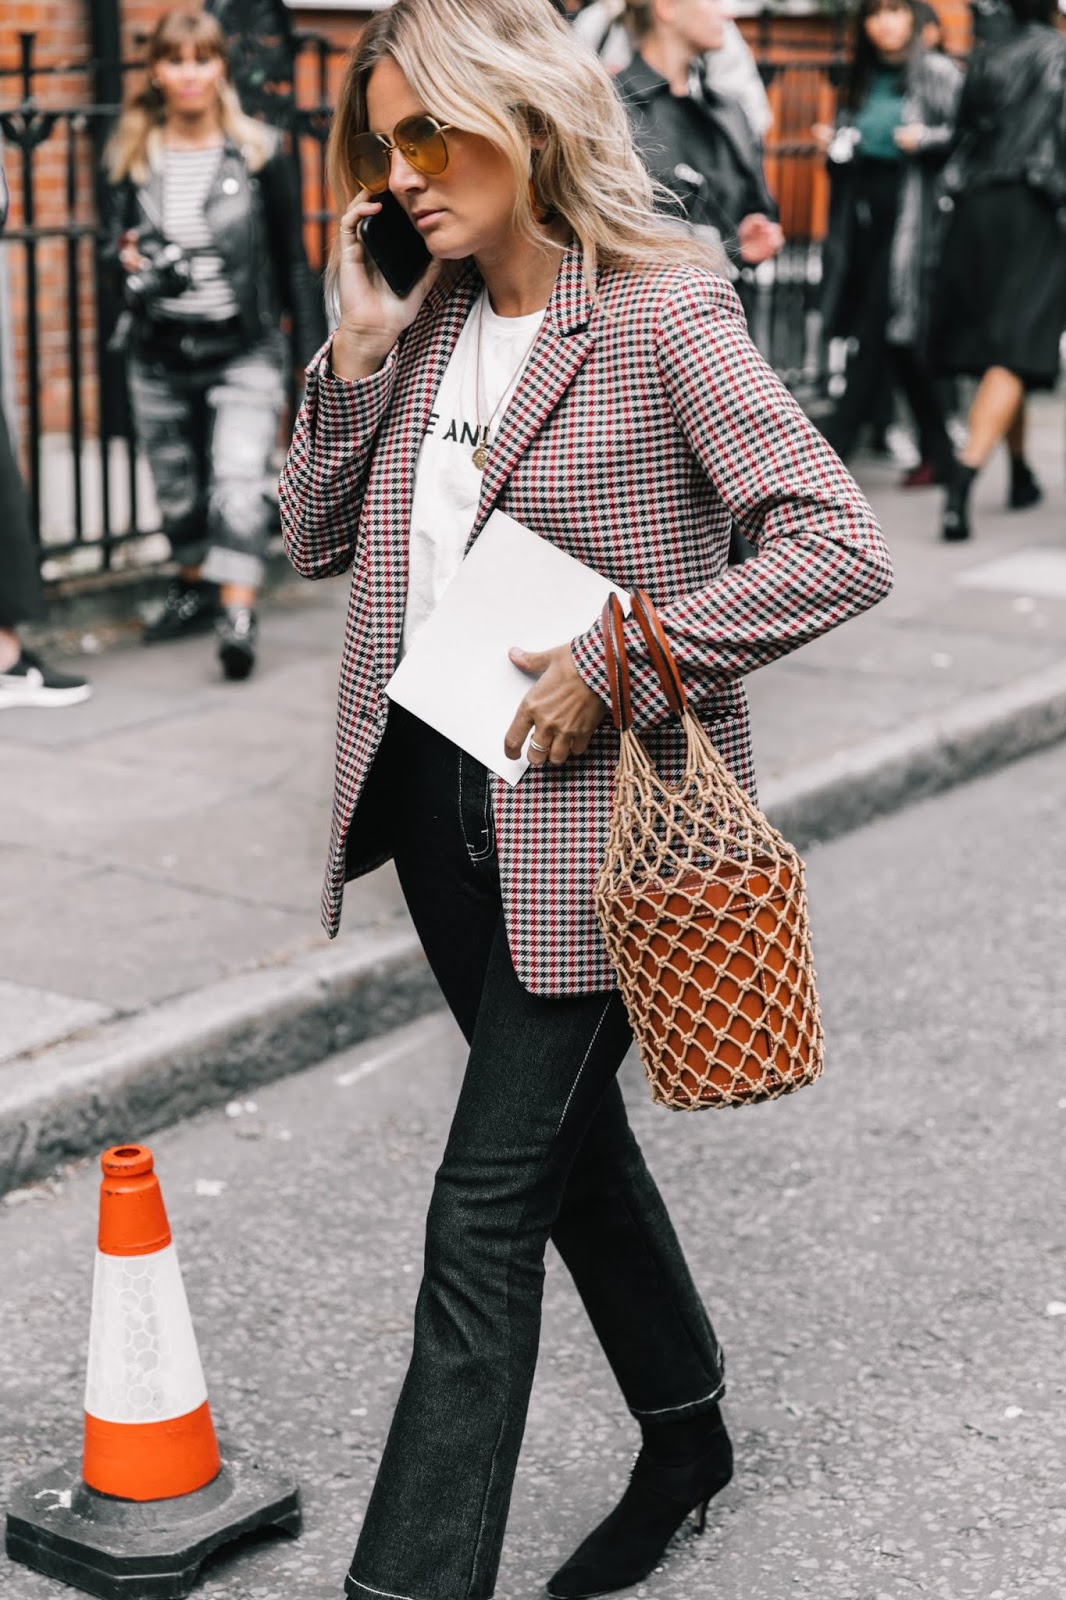 A Cool Way to Wear a Plaid Blazer for Fall